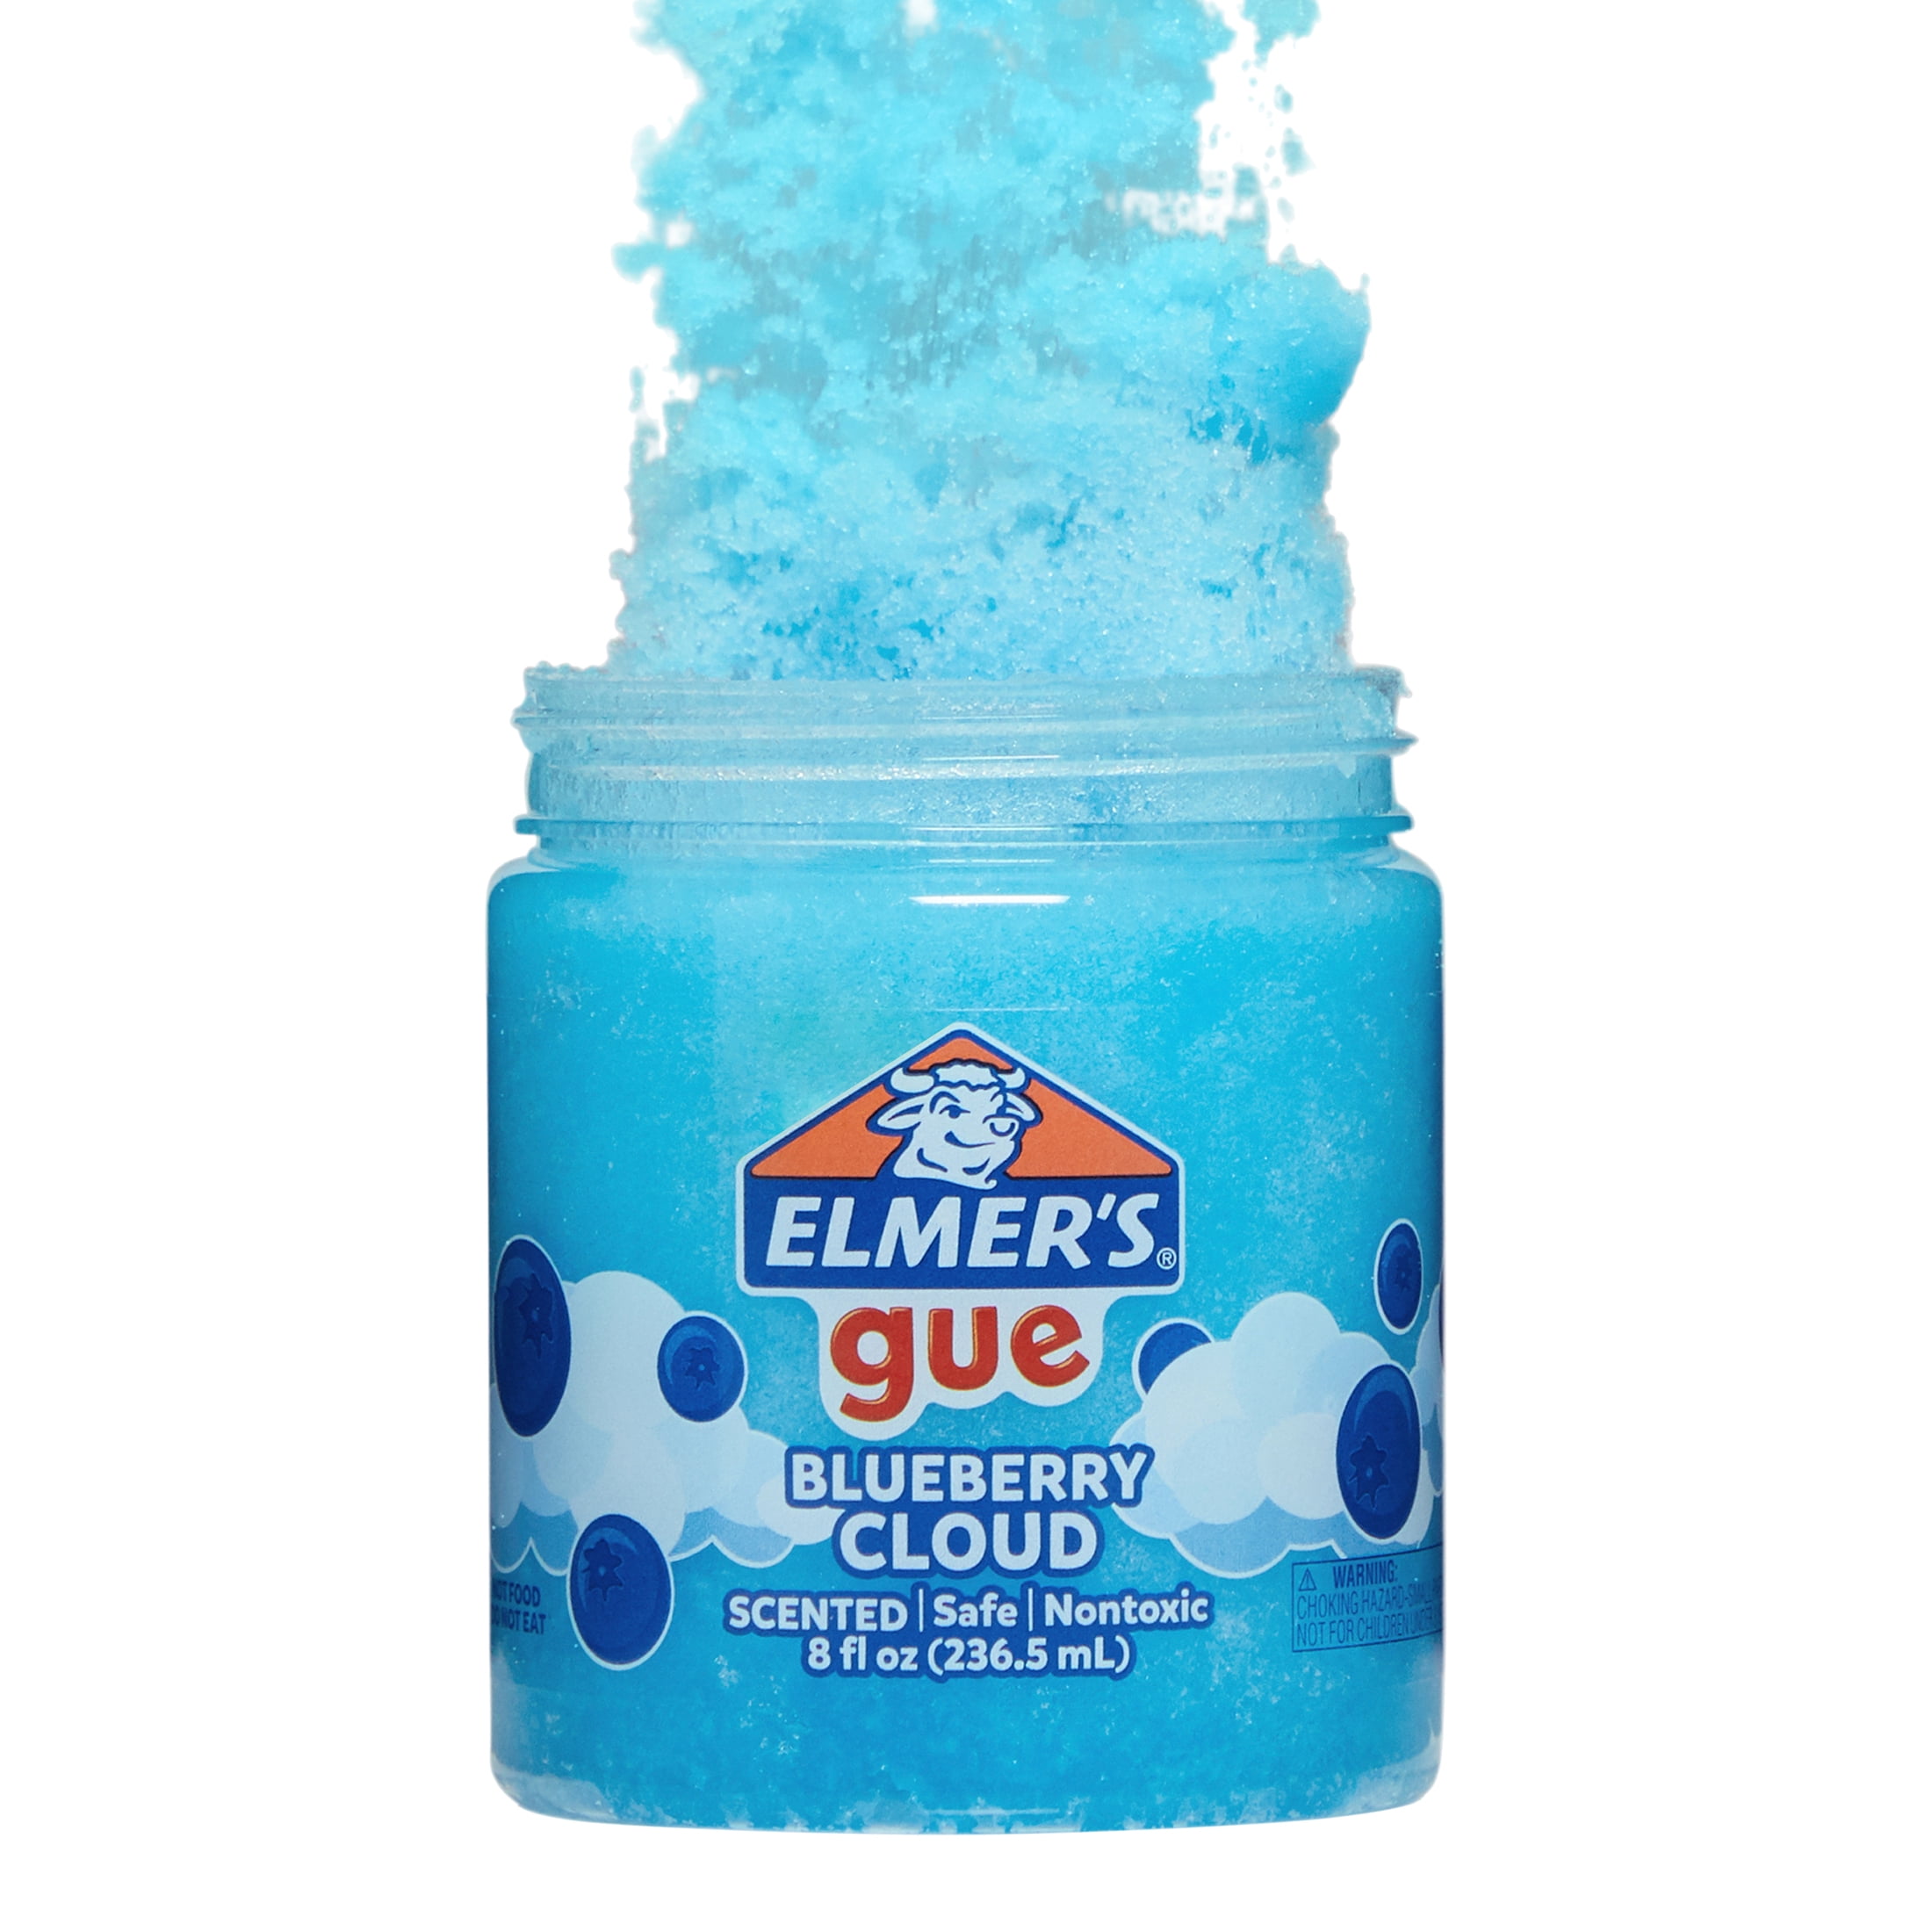 4) ELMER'S GUE 8oz BLUE BLUEBERRY SCENT Premade Slime (Safe Non-Toxic)  Squishy